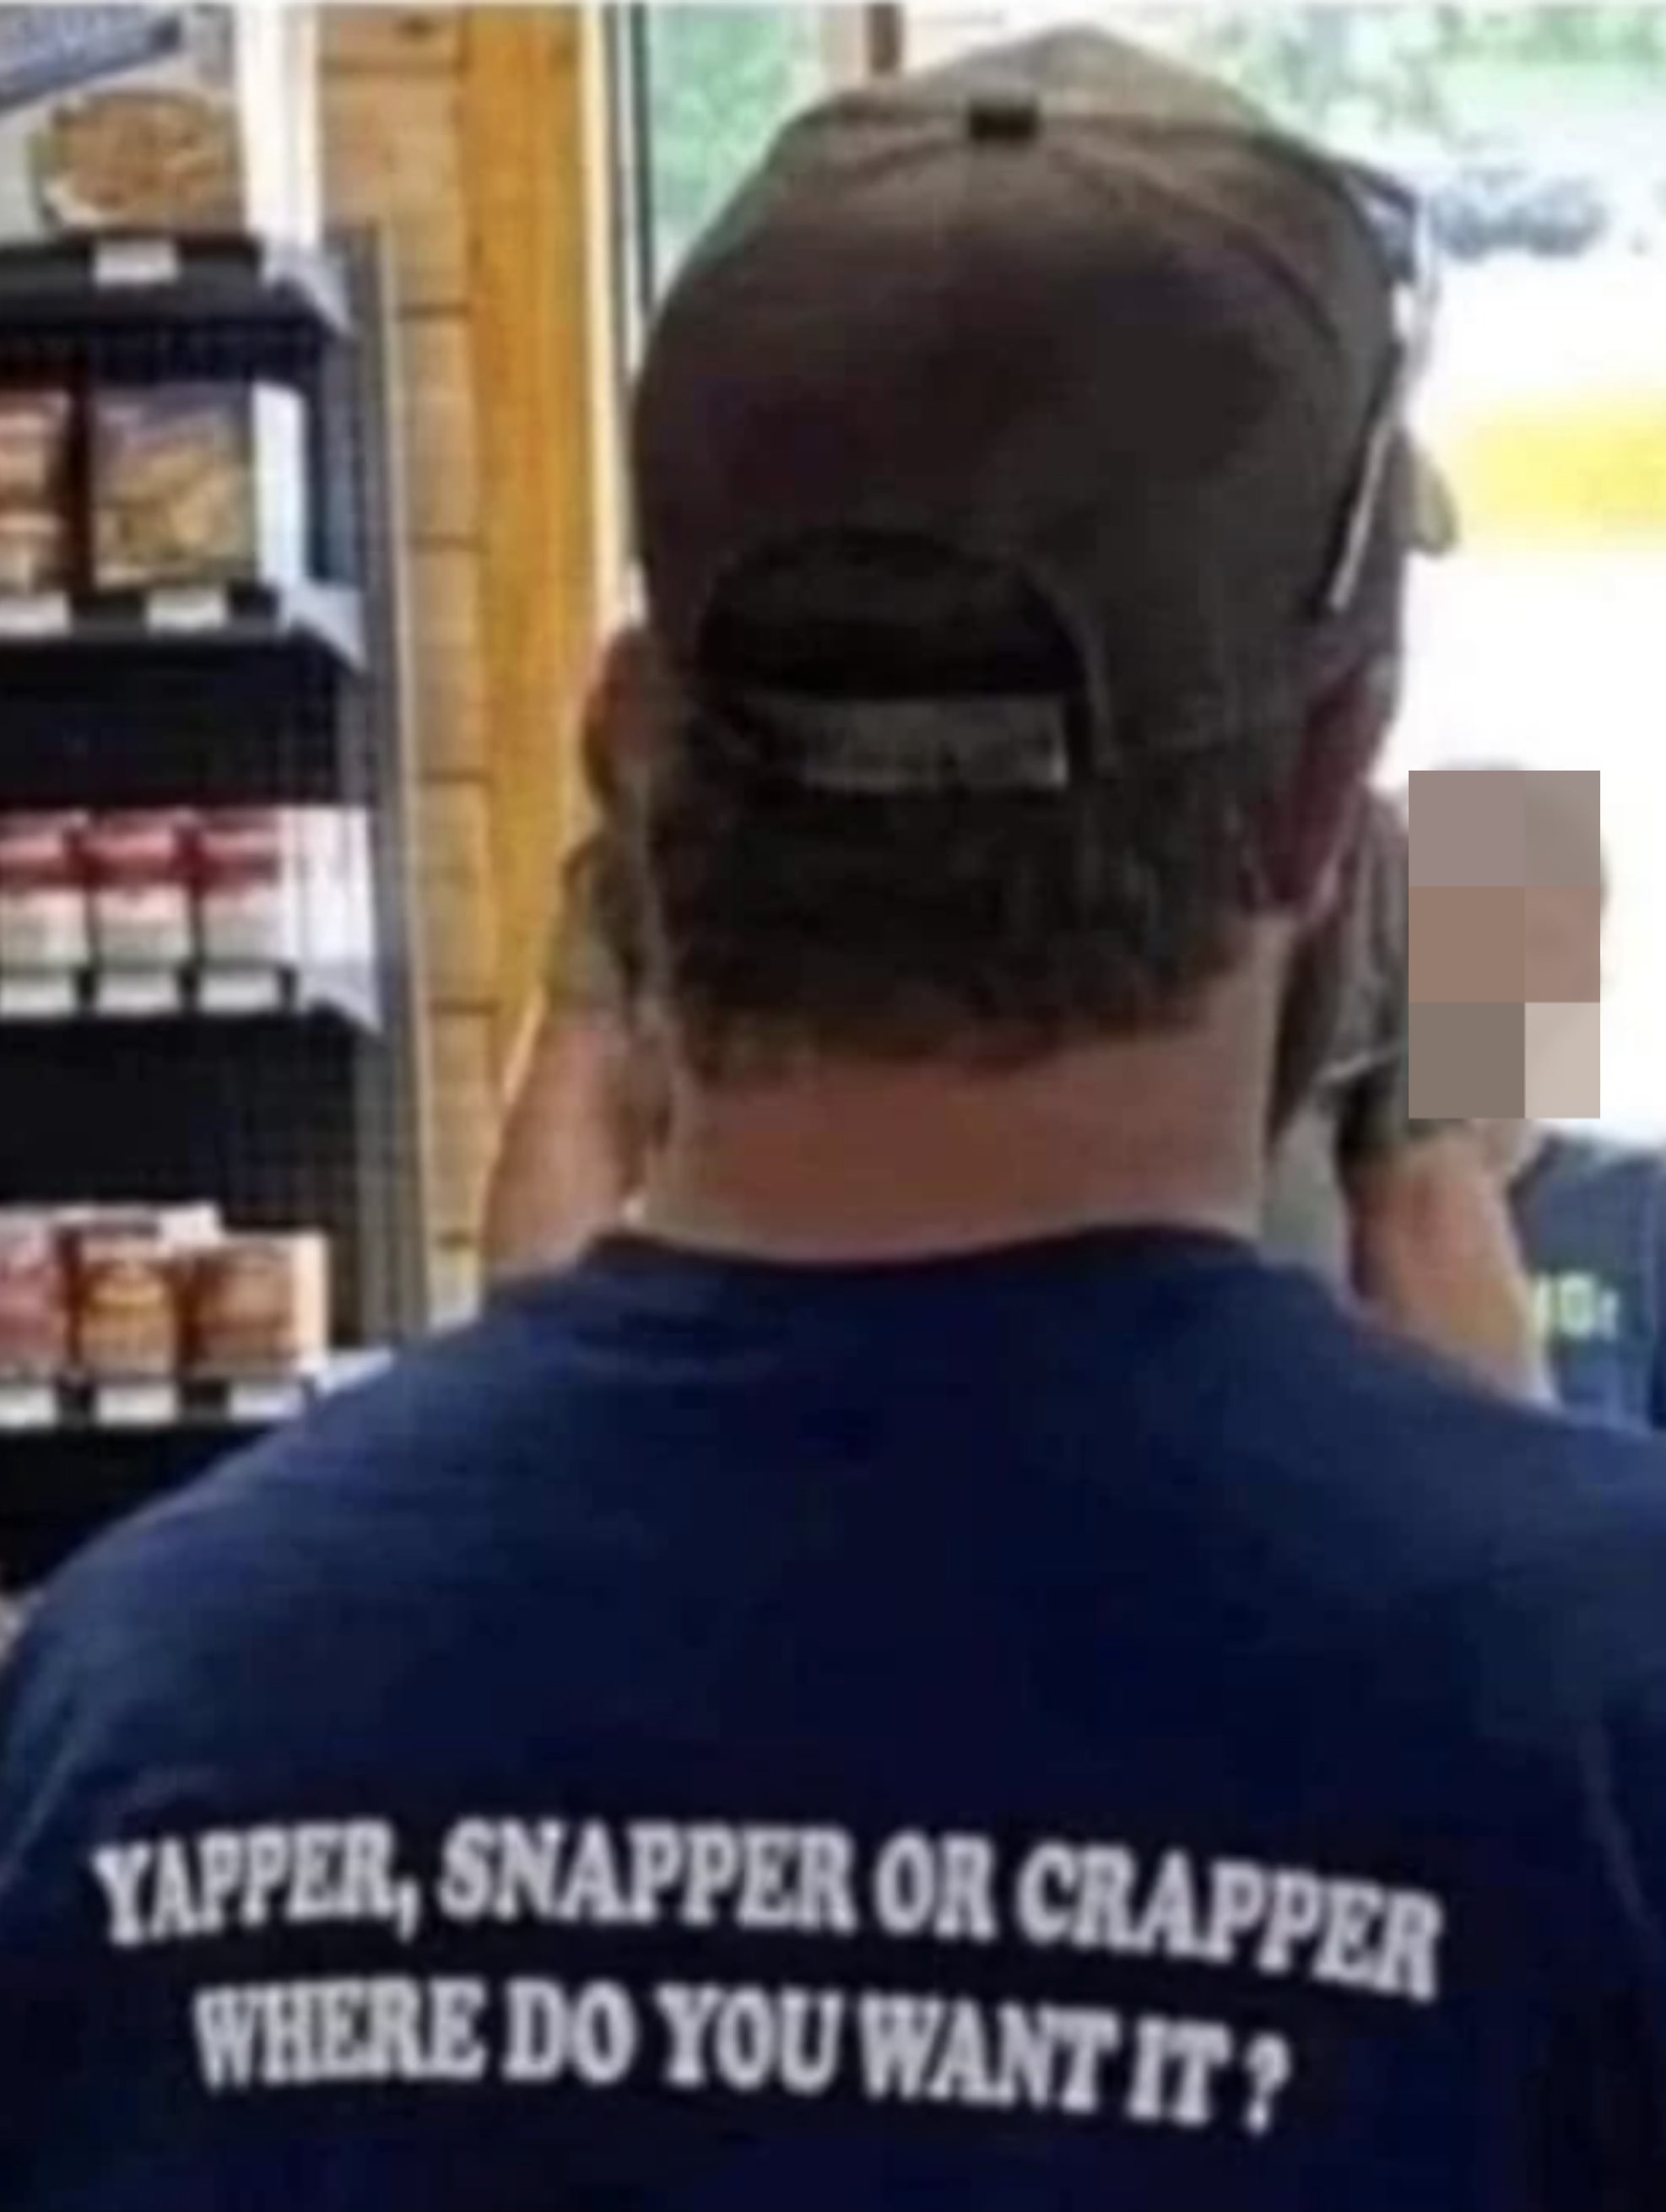 &quot;Yapper, Snapper or Crapper Where do you want it?&quot;